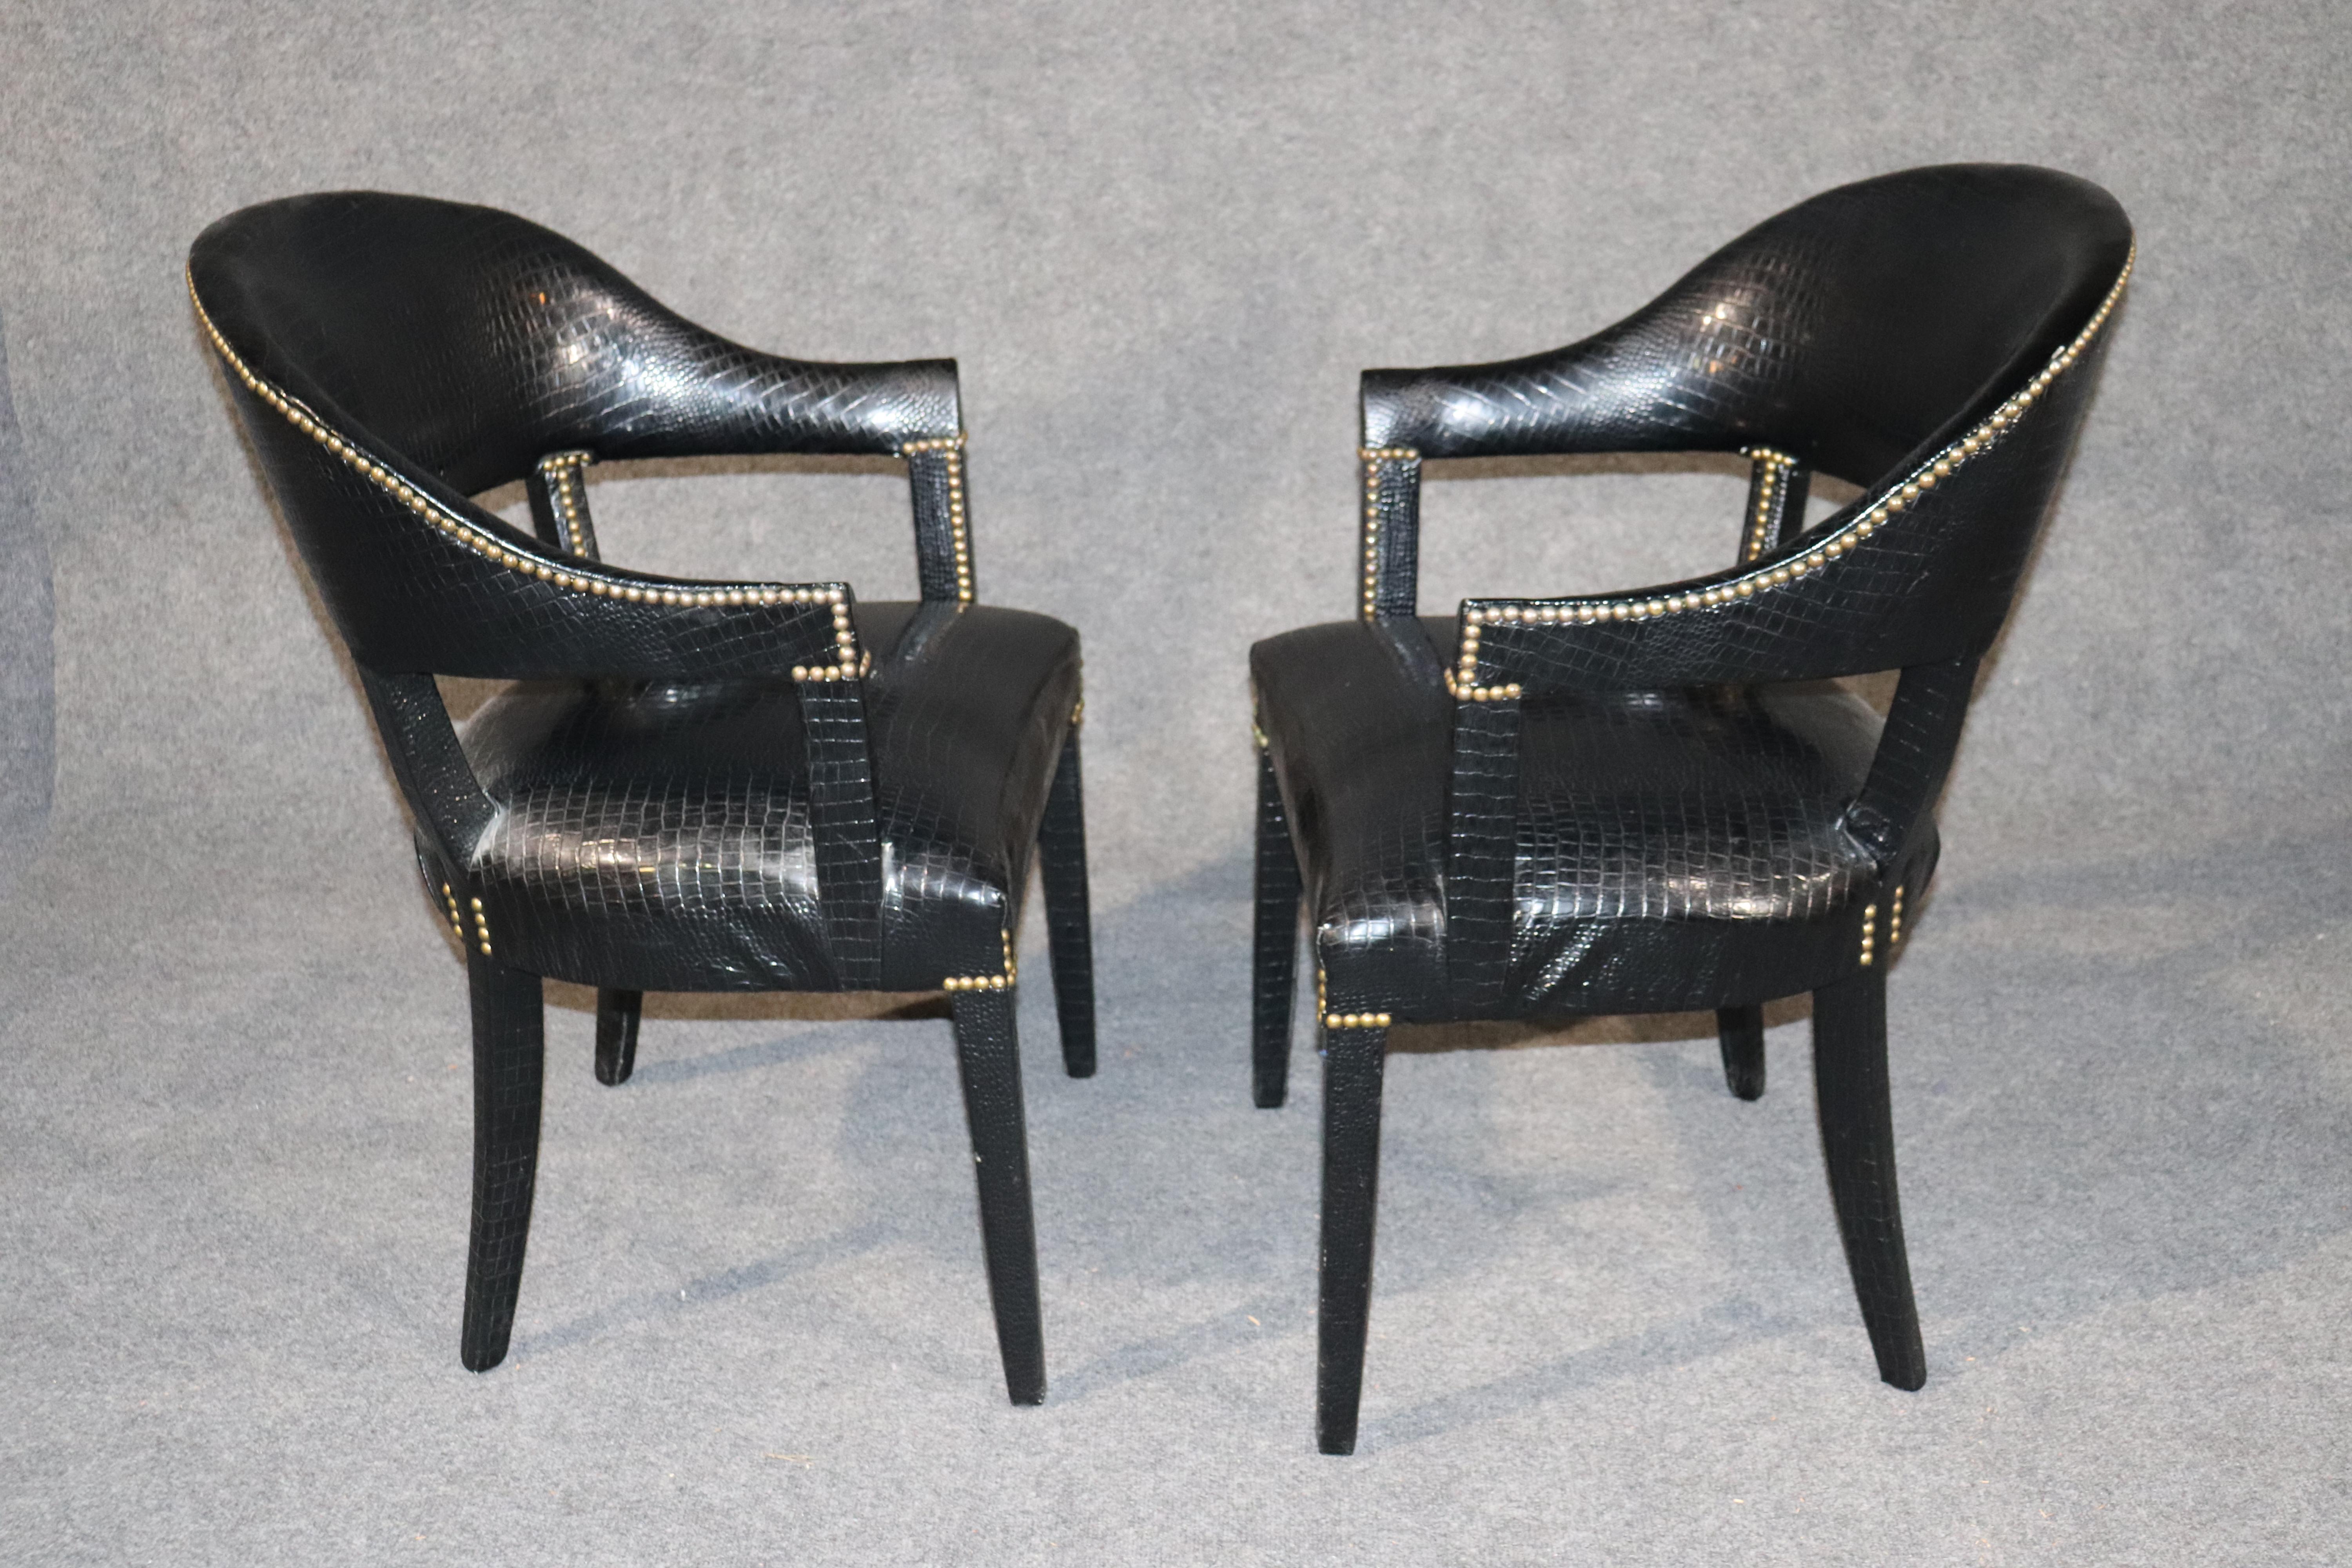 This is a beautiful pair of alligator-printed faux leather and mahogany chairs. They are perfect for a living room or even an office at the front of a desk. The chairs date to the 1980s and are in good condition. The chairs measure 34 tall x 24 wide